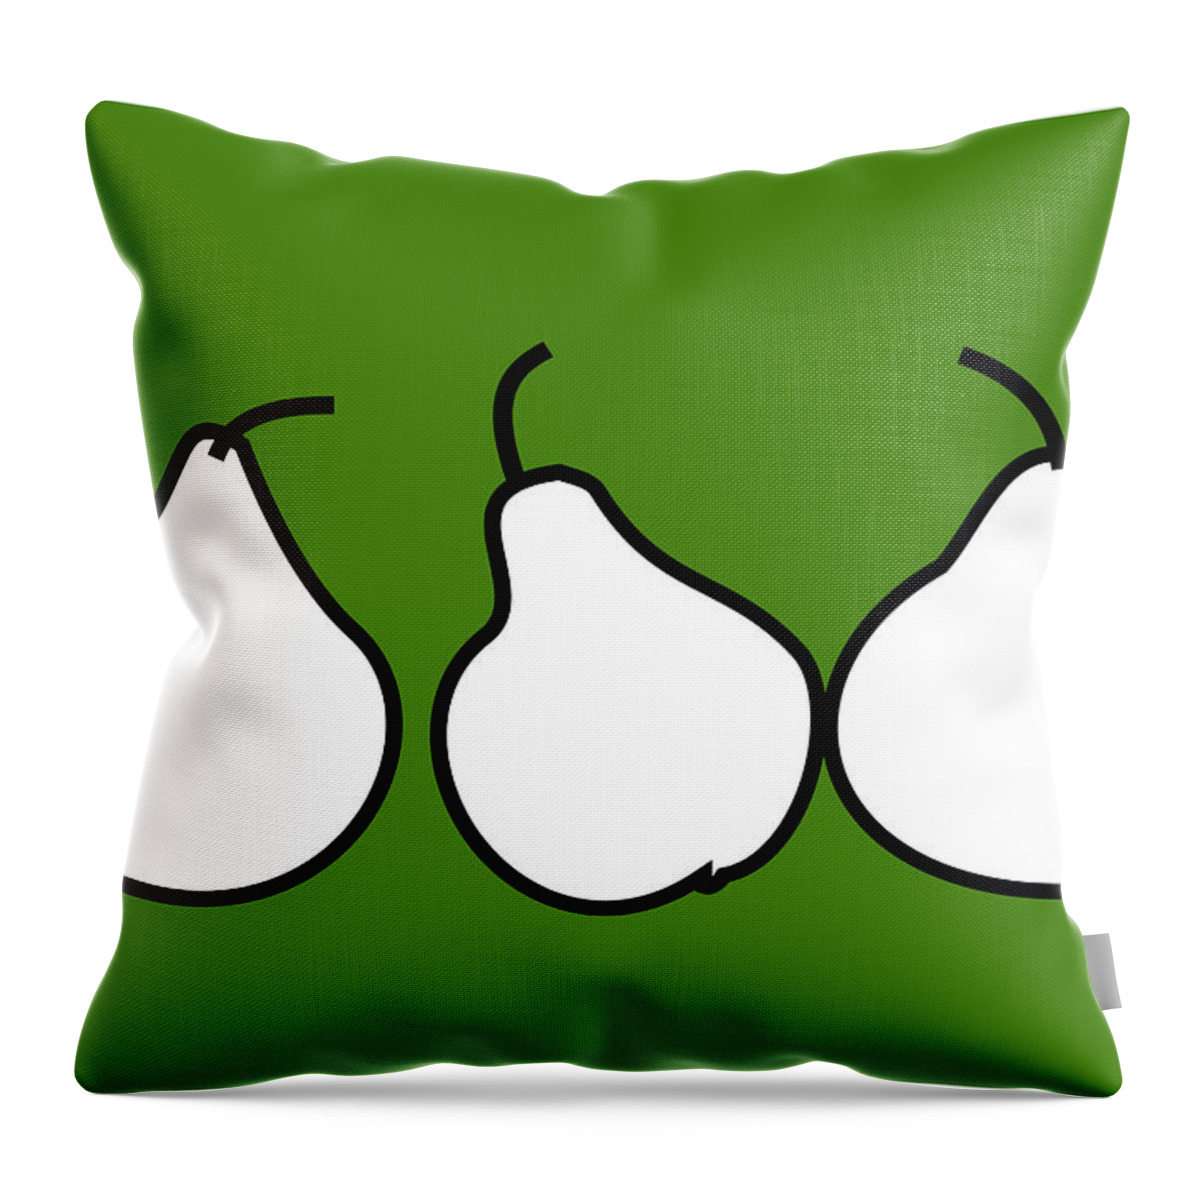 Still Life Throw Pillow featuring the digital art Three pears by Fatline Graphic Art